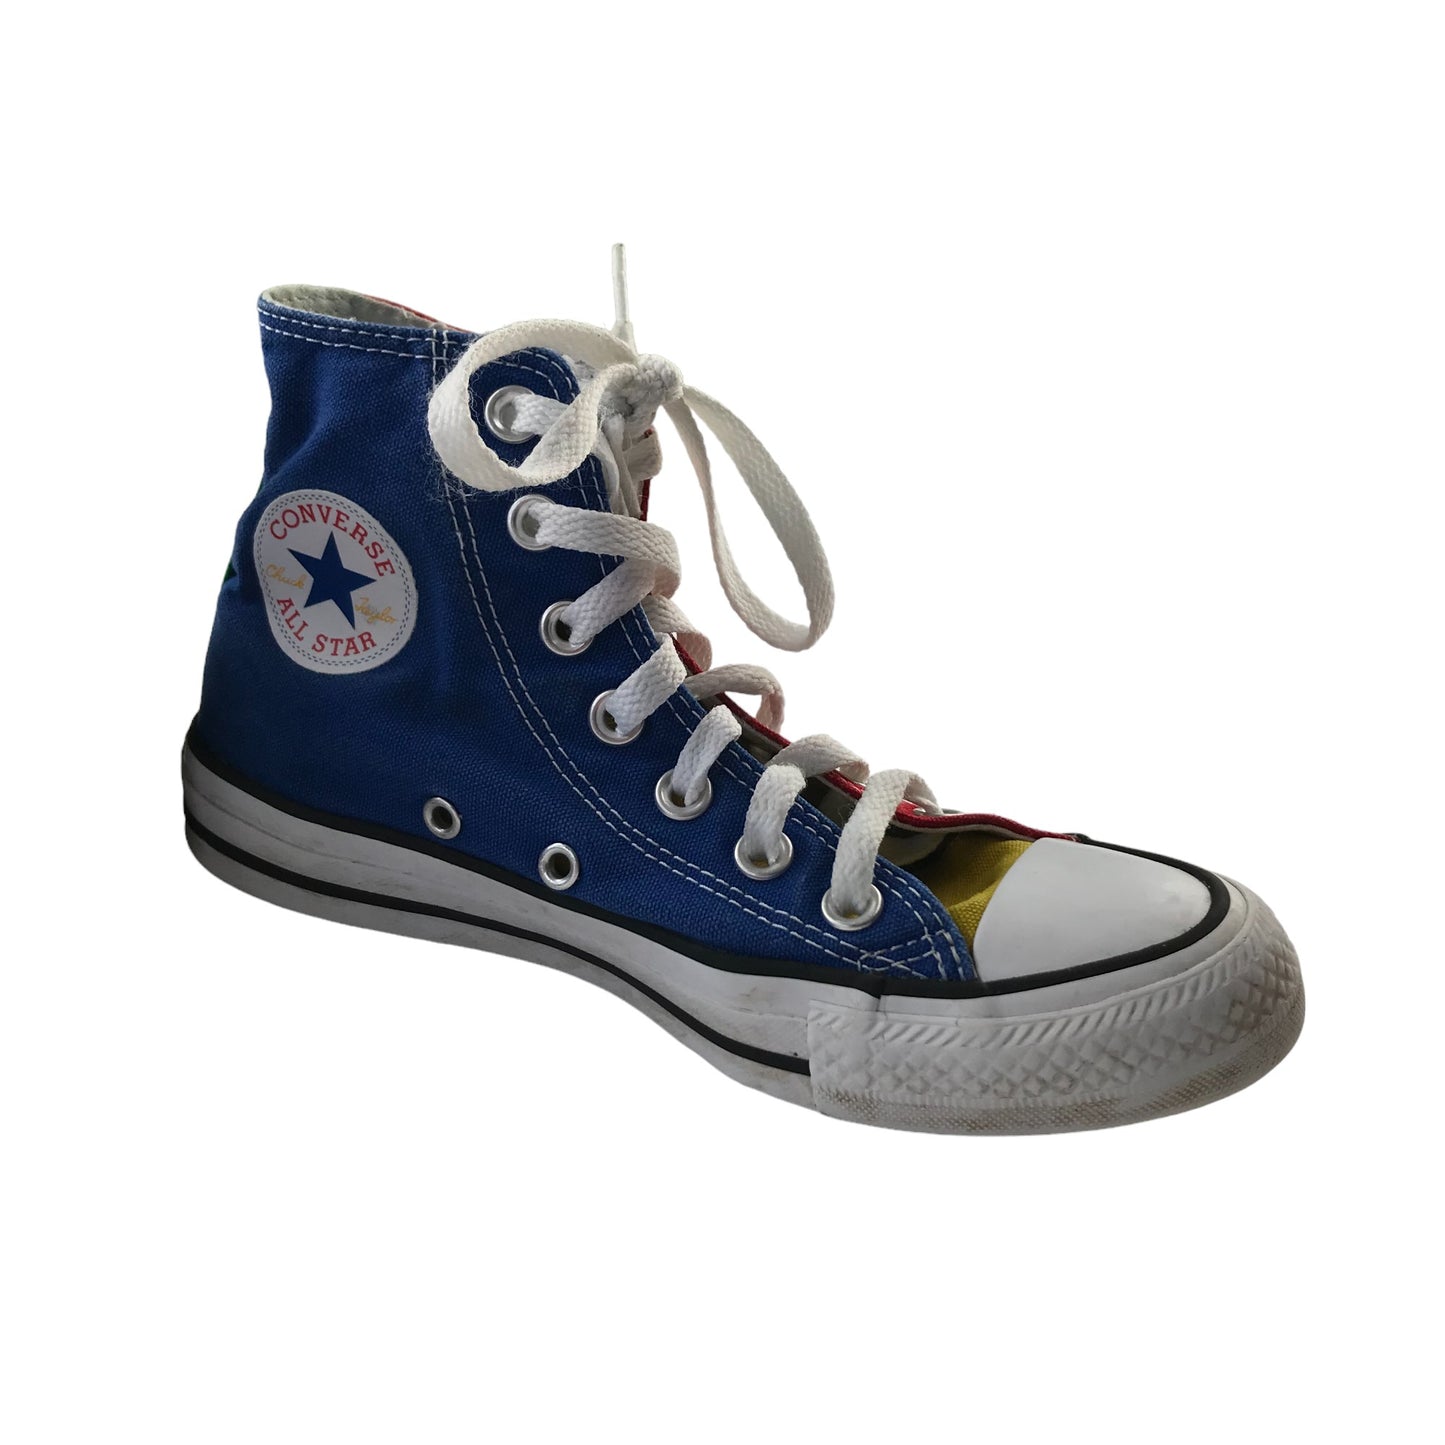 Converse Trainers Shoe Size 3 Blue Yellow and Red Panelled All Star Chuck Taylor High Top